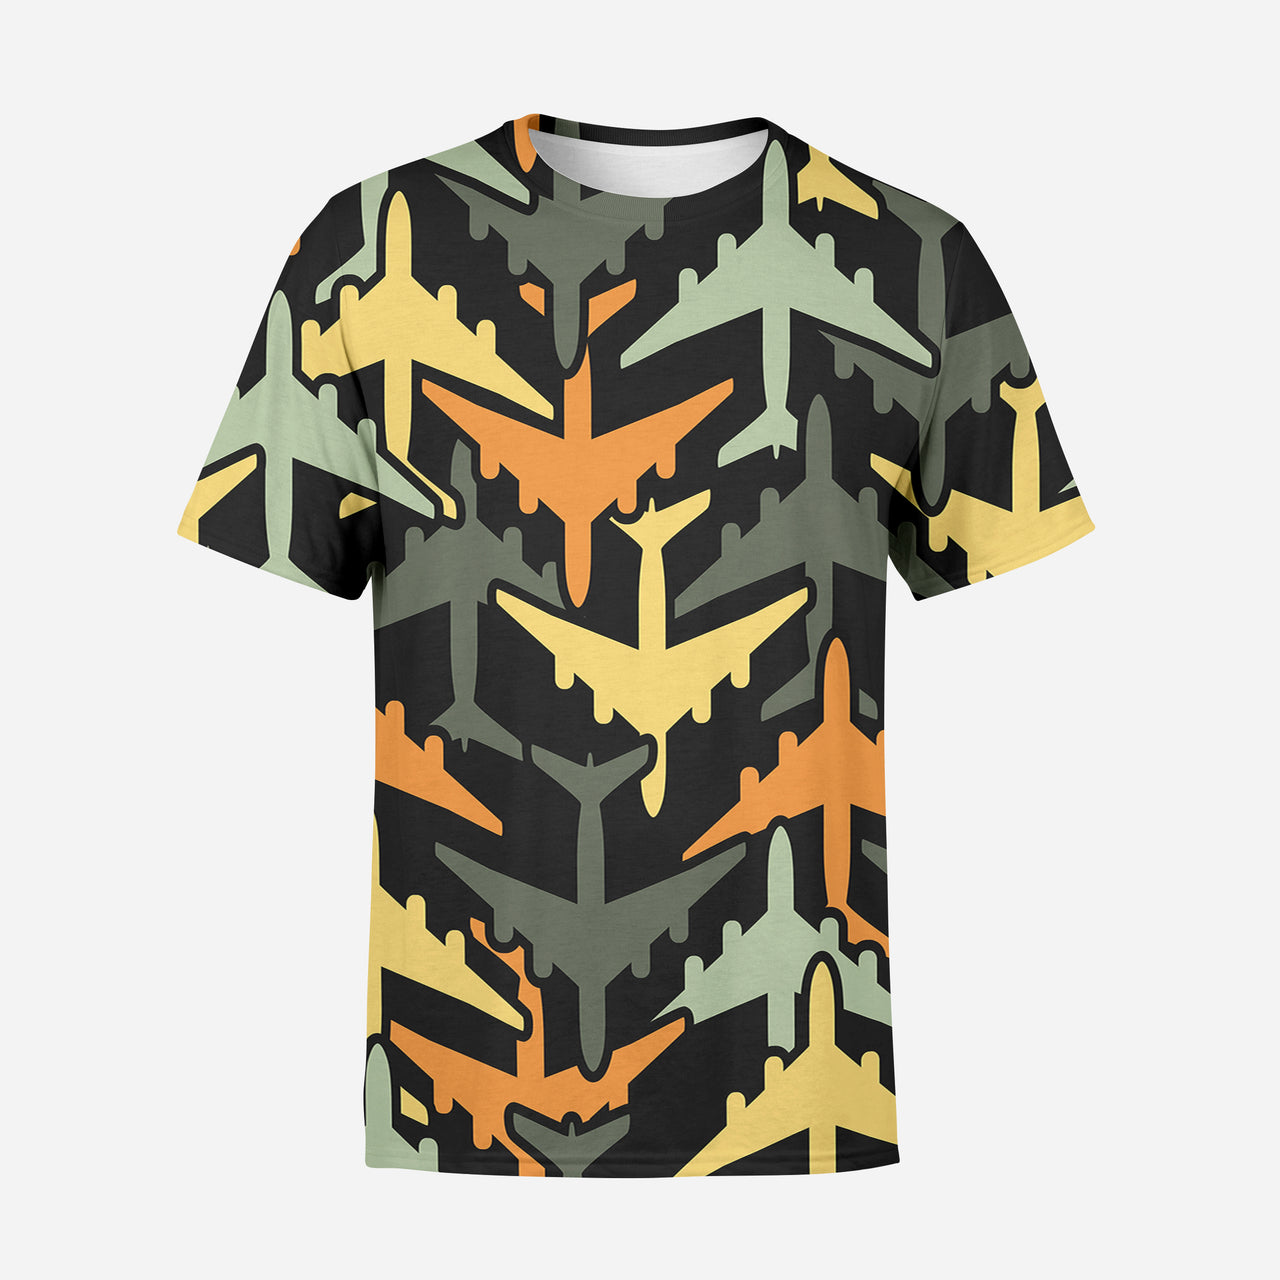 Volume 2 Super Colourful Airplanes Designed 3D T-Shirts